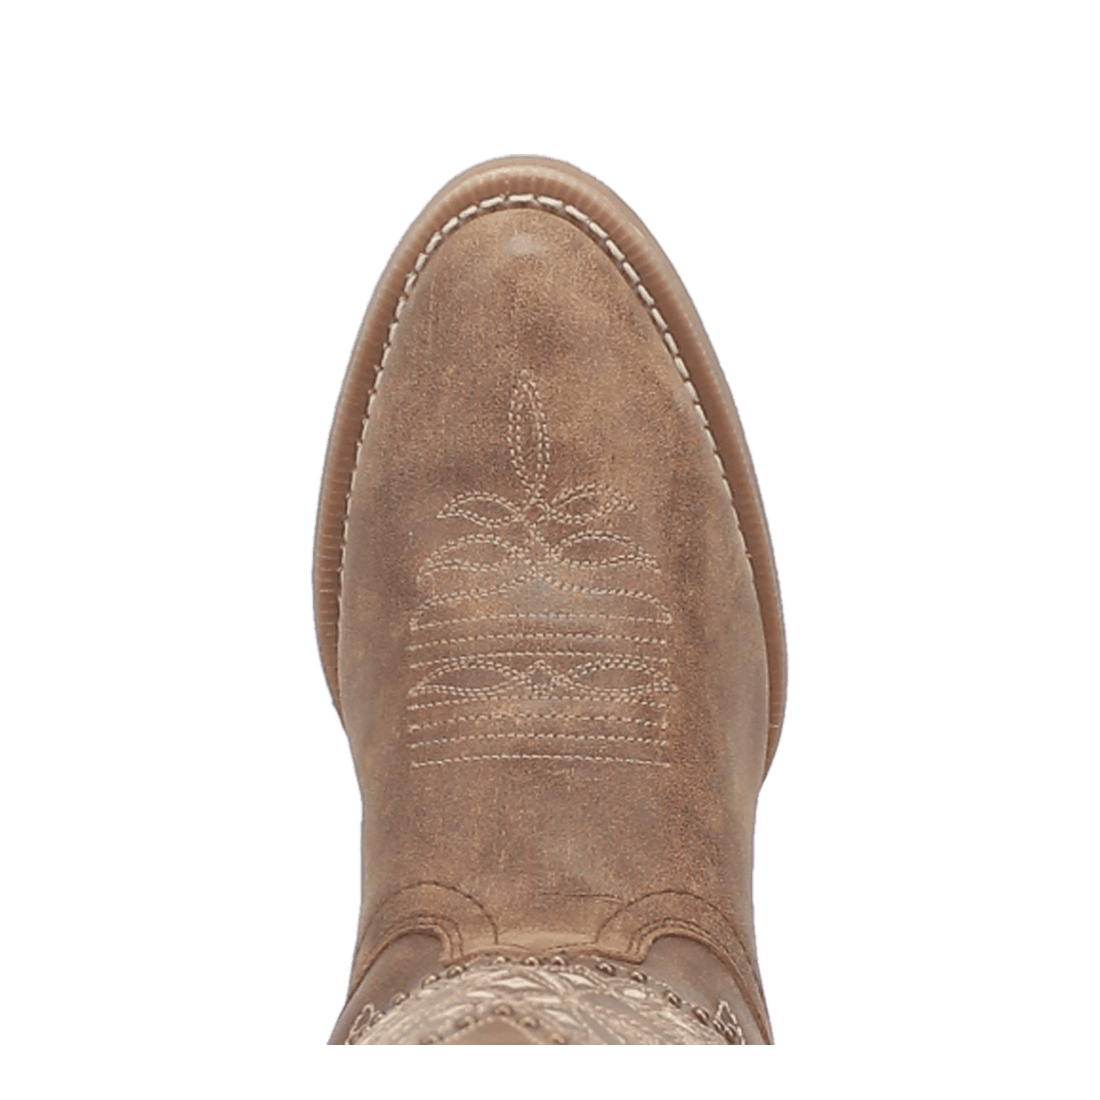 JOURNEE LEATHER BOOT Preview #13